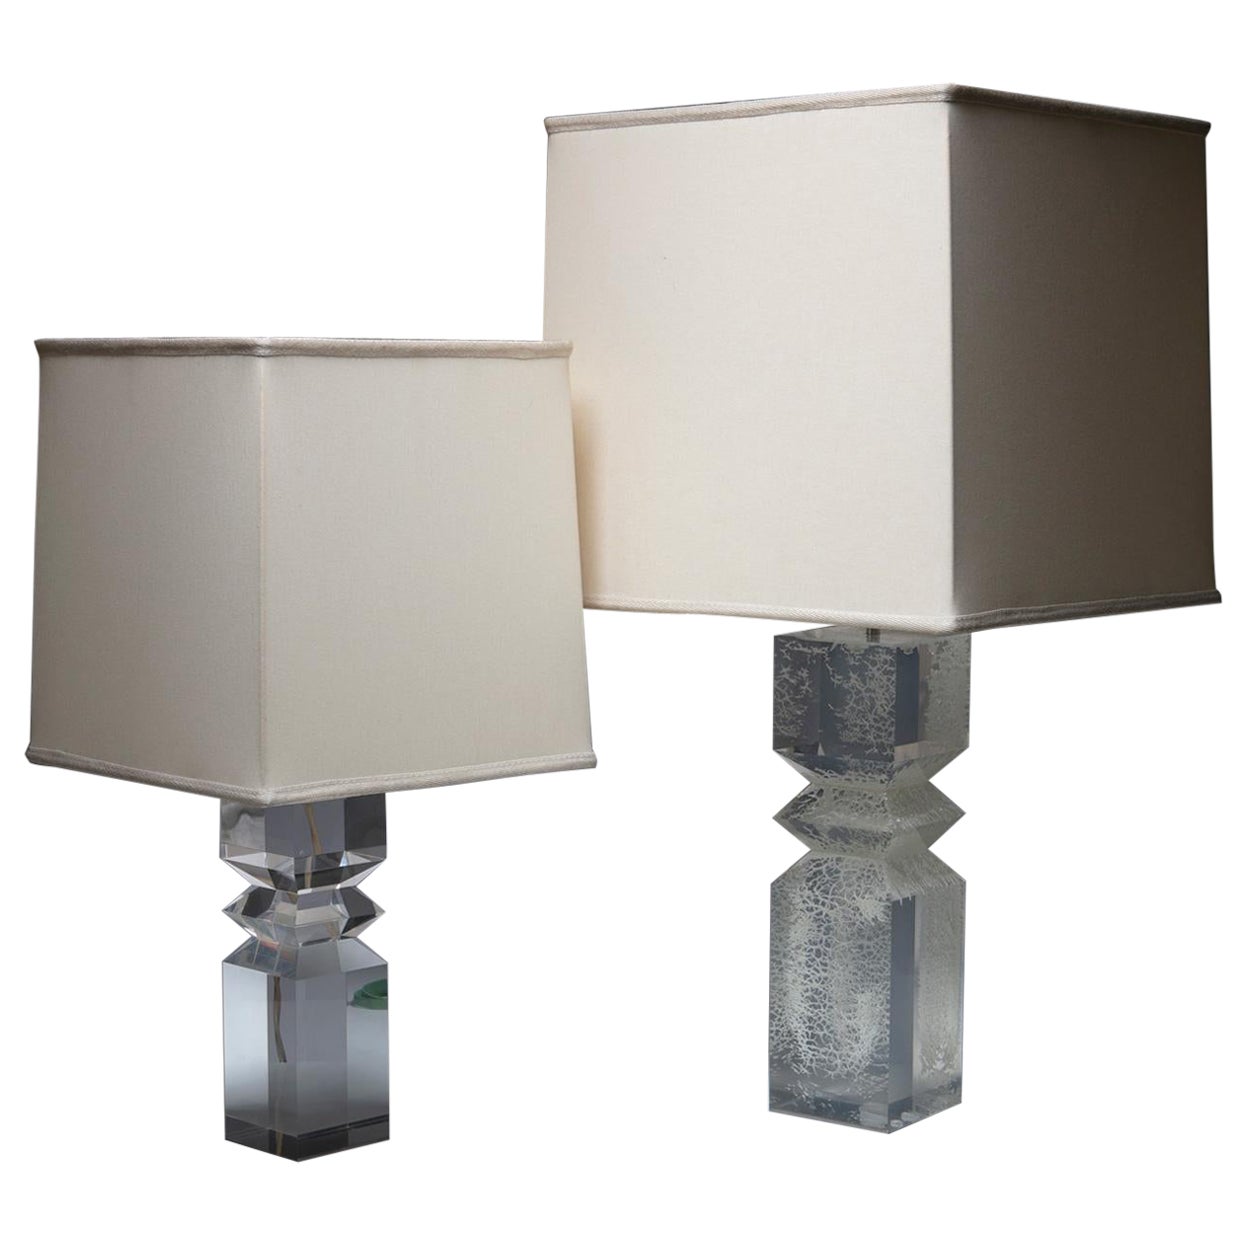 Set of Two Plexiglass Table Lamps by Alessio Tasca for Fusina, Italy, 1970s